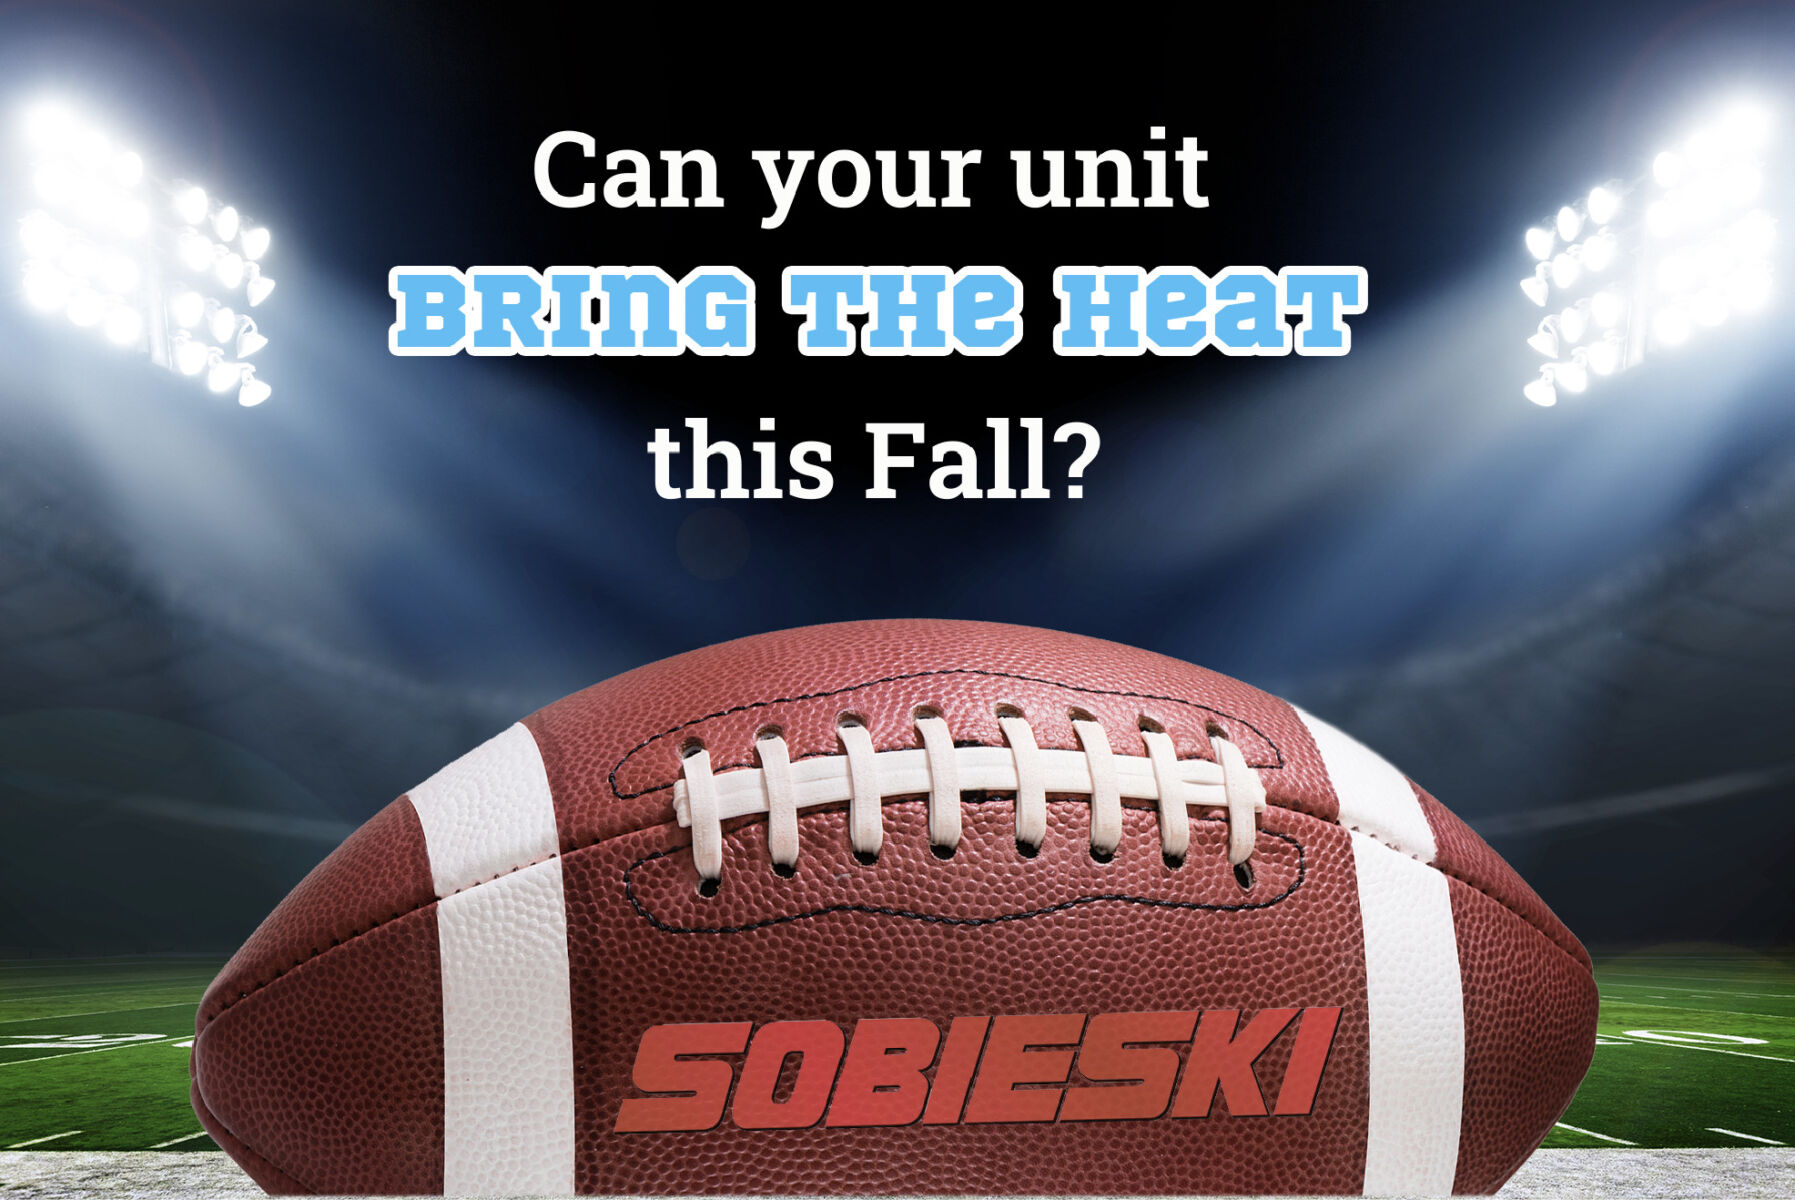 Can your unit bring the heat this fall?